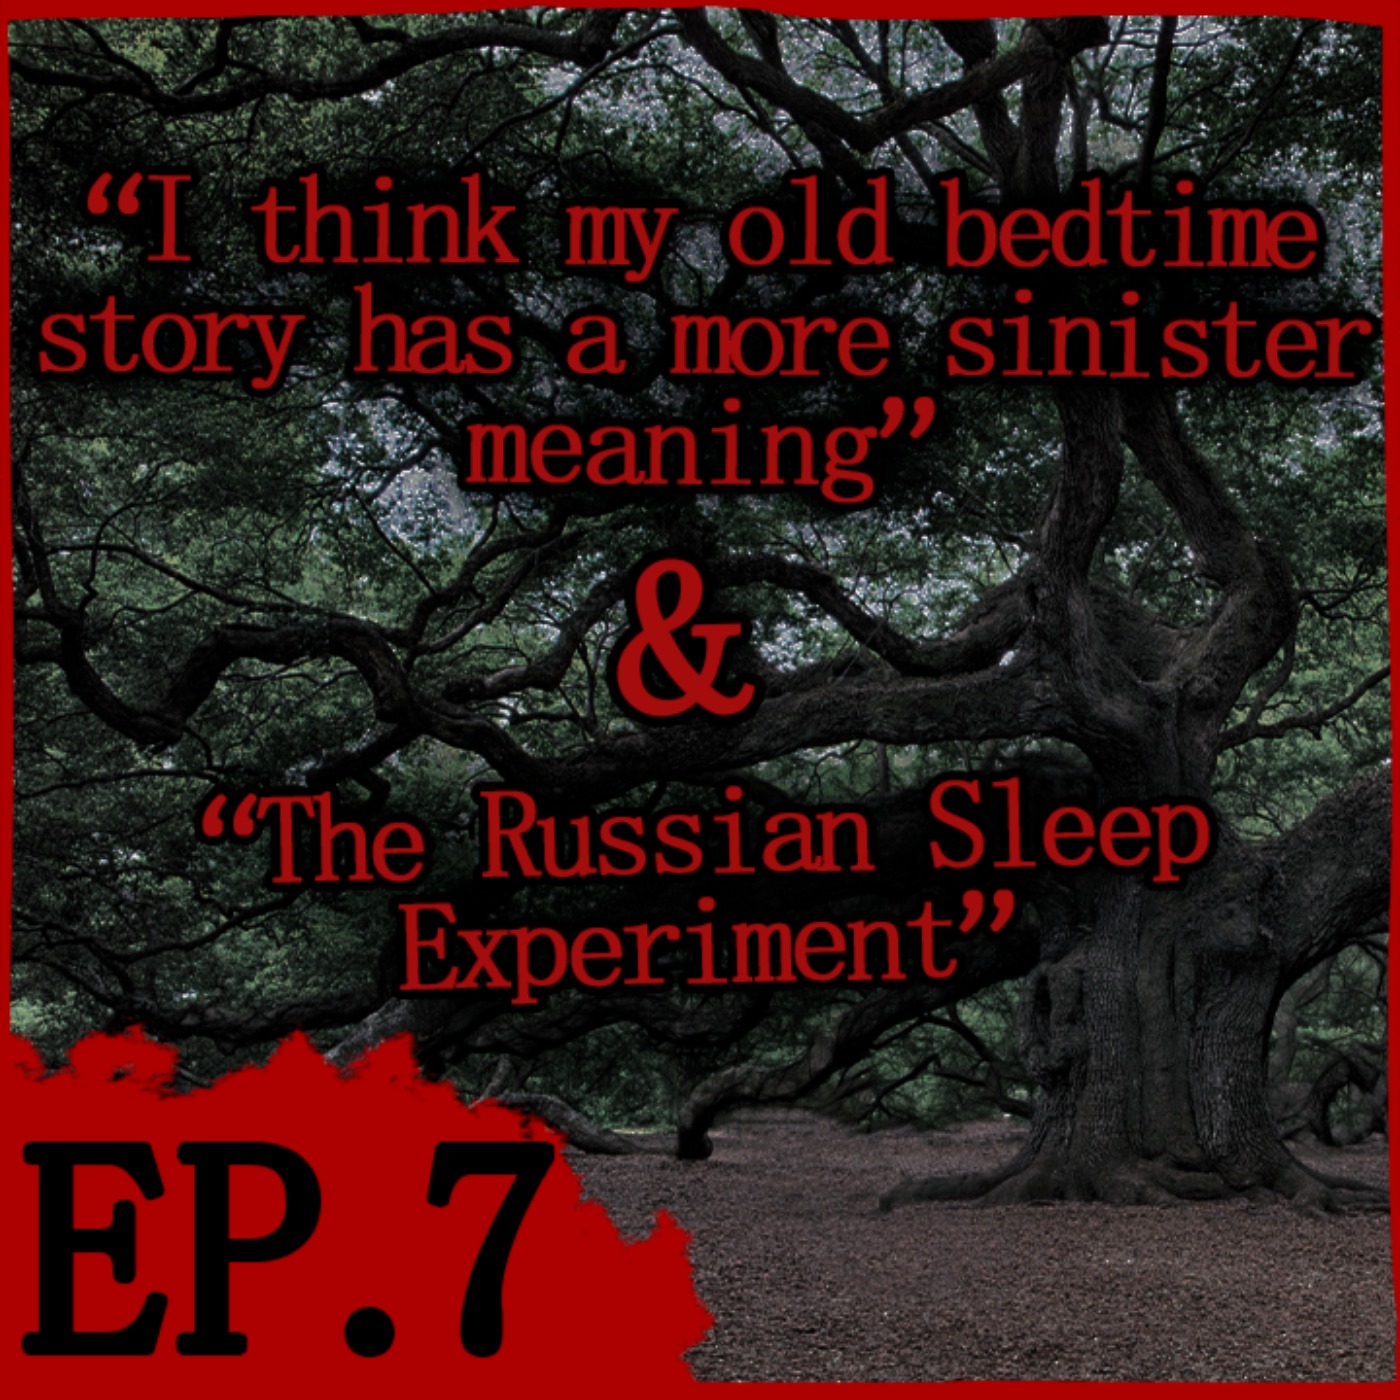 cover art for Episode 7: "I think my old bedtime story has a more sinister meaning" & The Russian Sleep Experioment"